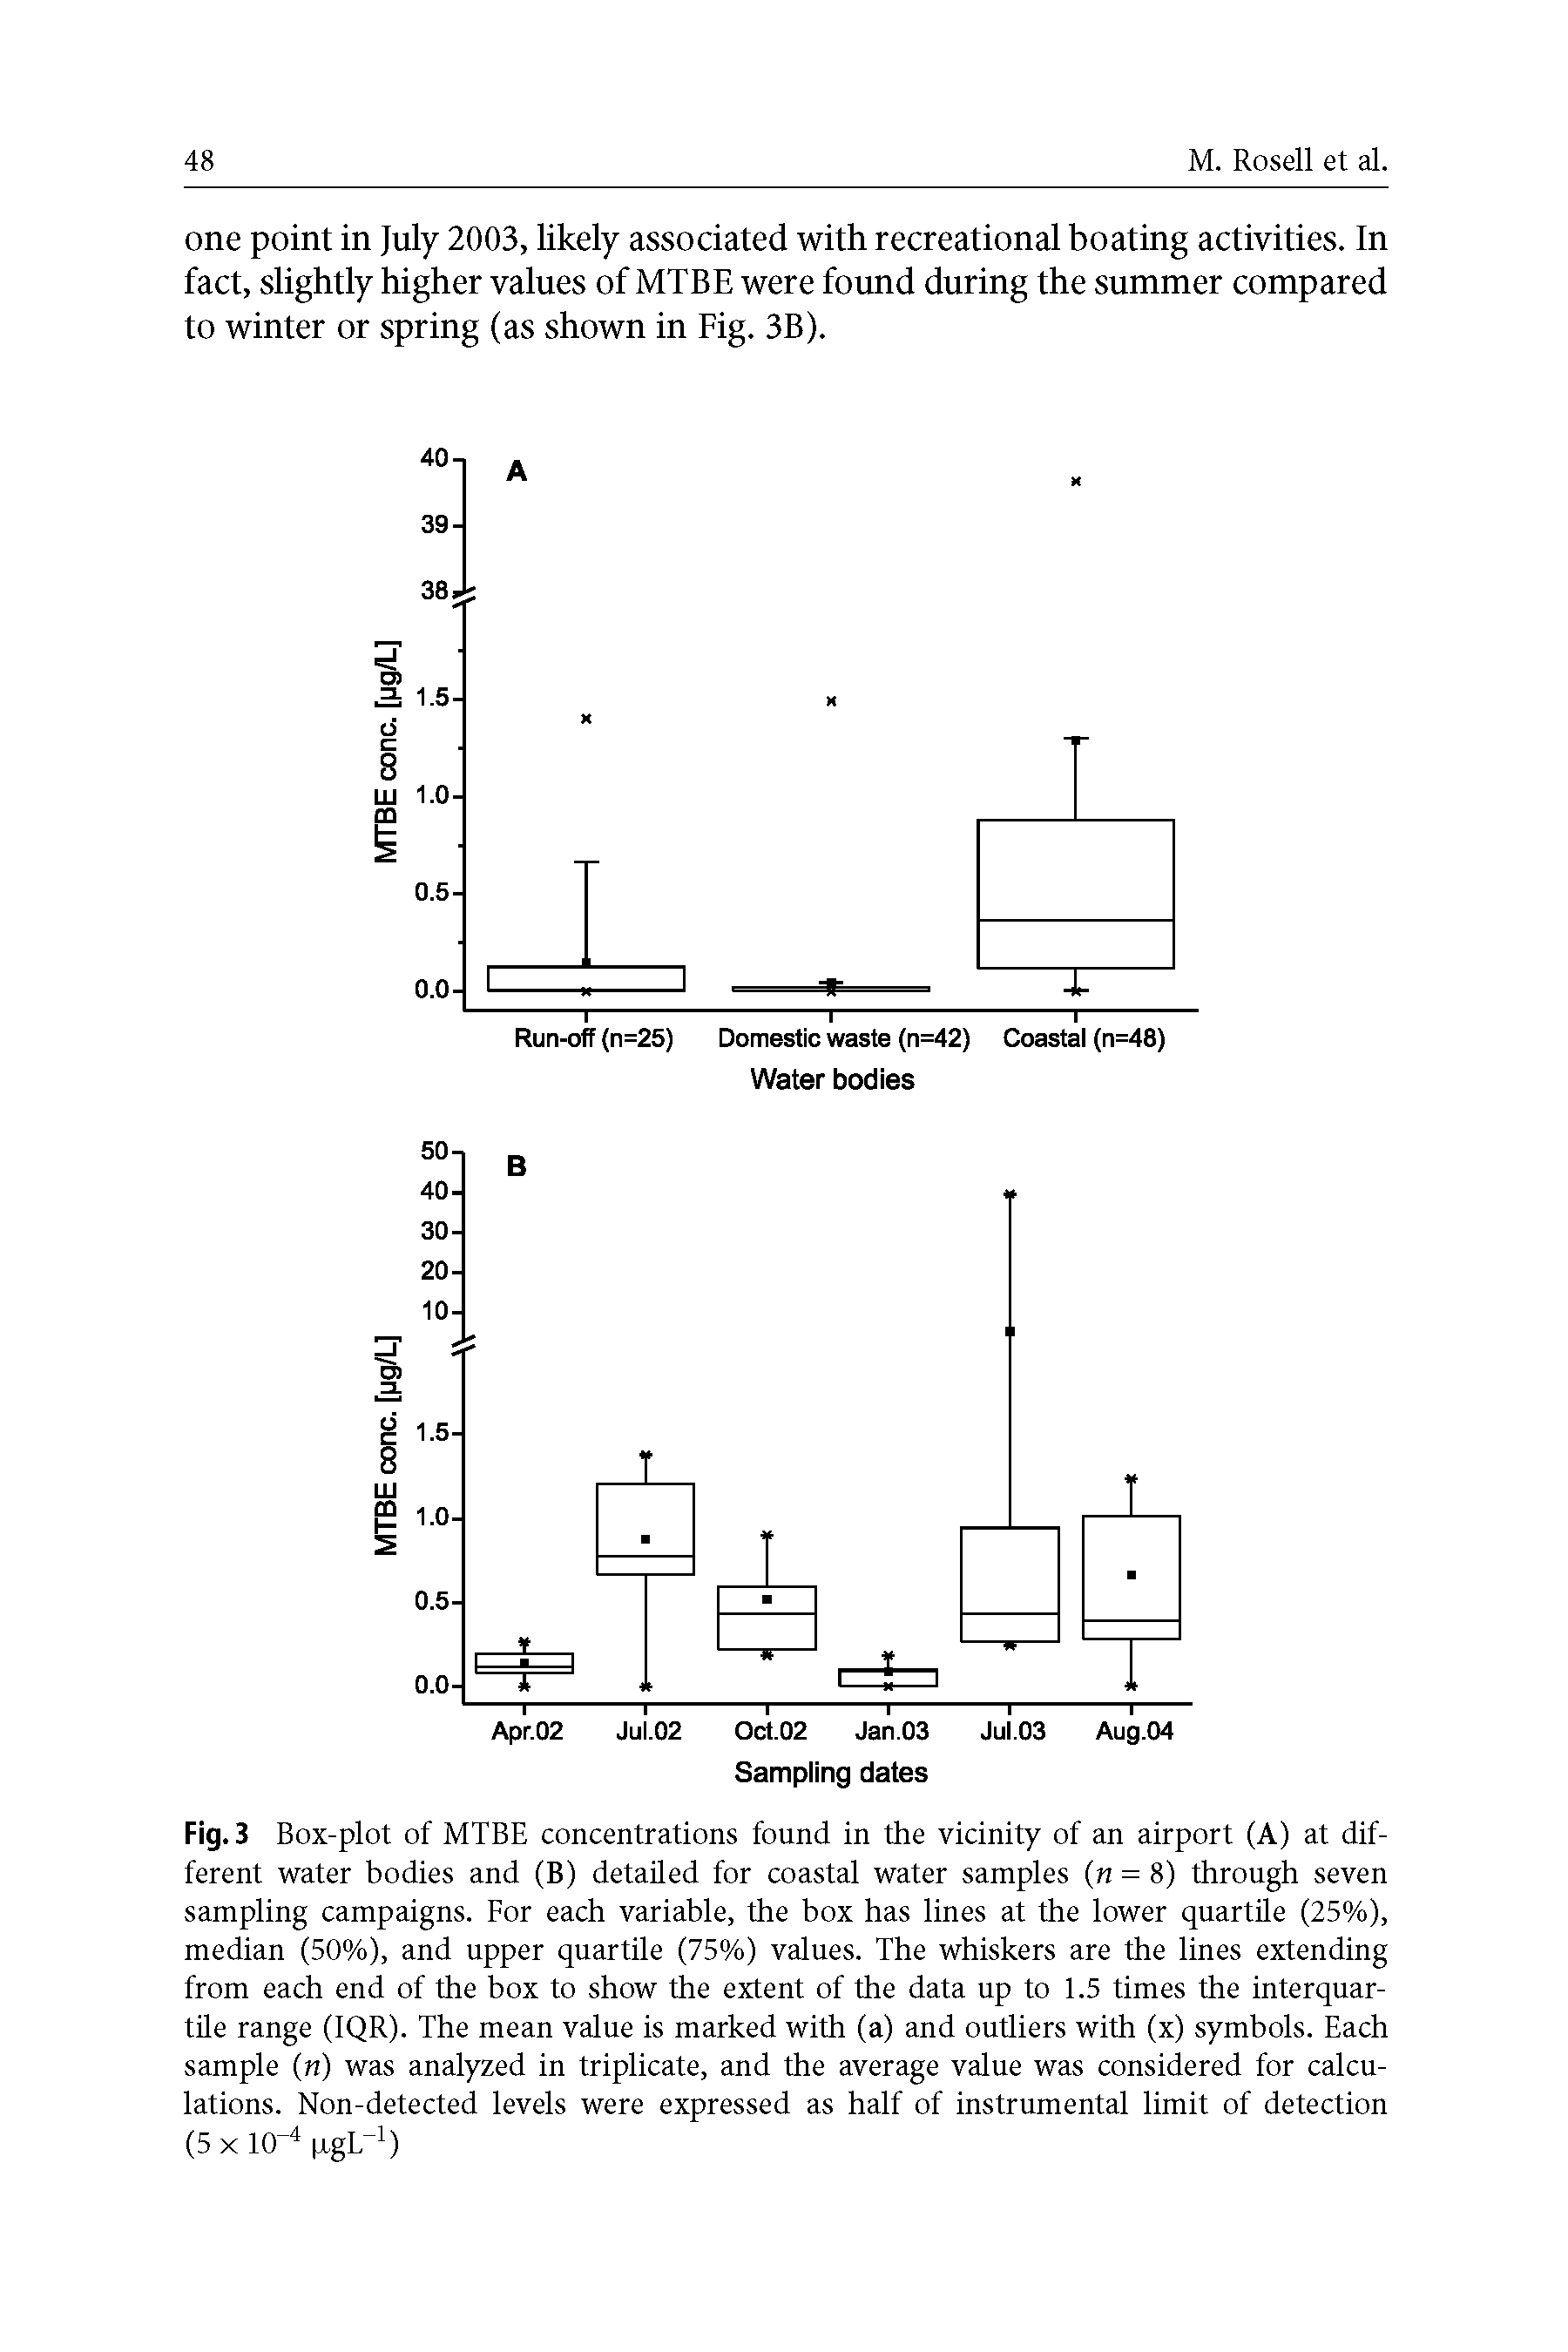 Fig. 3 Box-plot of MTBE concentrations found in the vicinity of an airport (A) at different water bodies and (B) detailed for coastal water samples ( = 8) through seven sampling campaigns. For each variable, the box has lines at the lower quartile (25%), median (50%), and upper quartile (75%) values. The whiskers are the lines extending from each end of the box to show the extent of the data up to 1.5 times the interquartile range (IQR). The mean value is marked with (a) and outliers with (x) symbols. Each sample ( ) was analyzed in triplicate, and the average value was considered for calculations. Non-detected levels were expressed as half of instrumental limit of detection (5 X 10 rgL )...